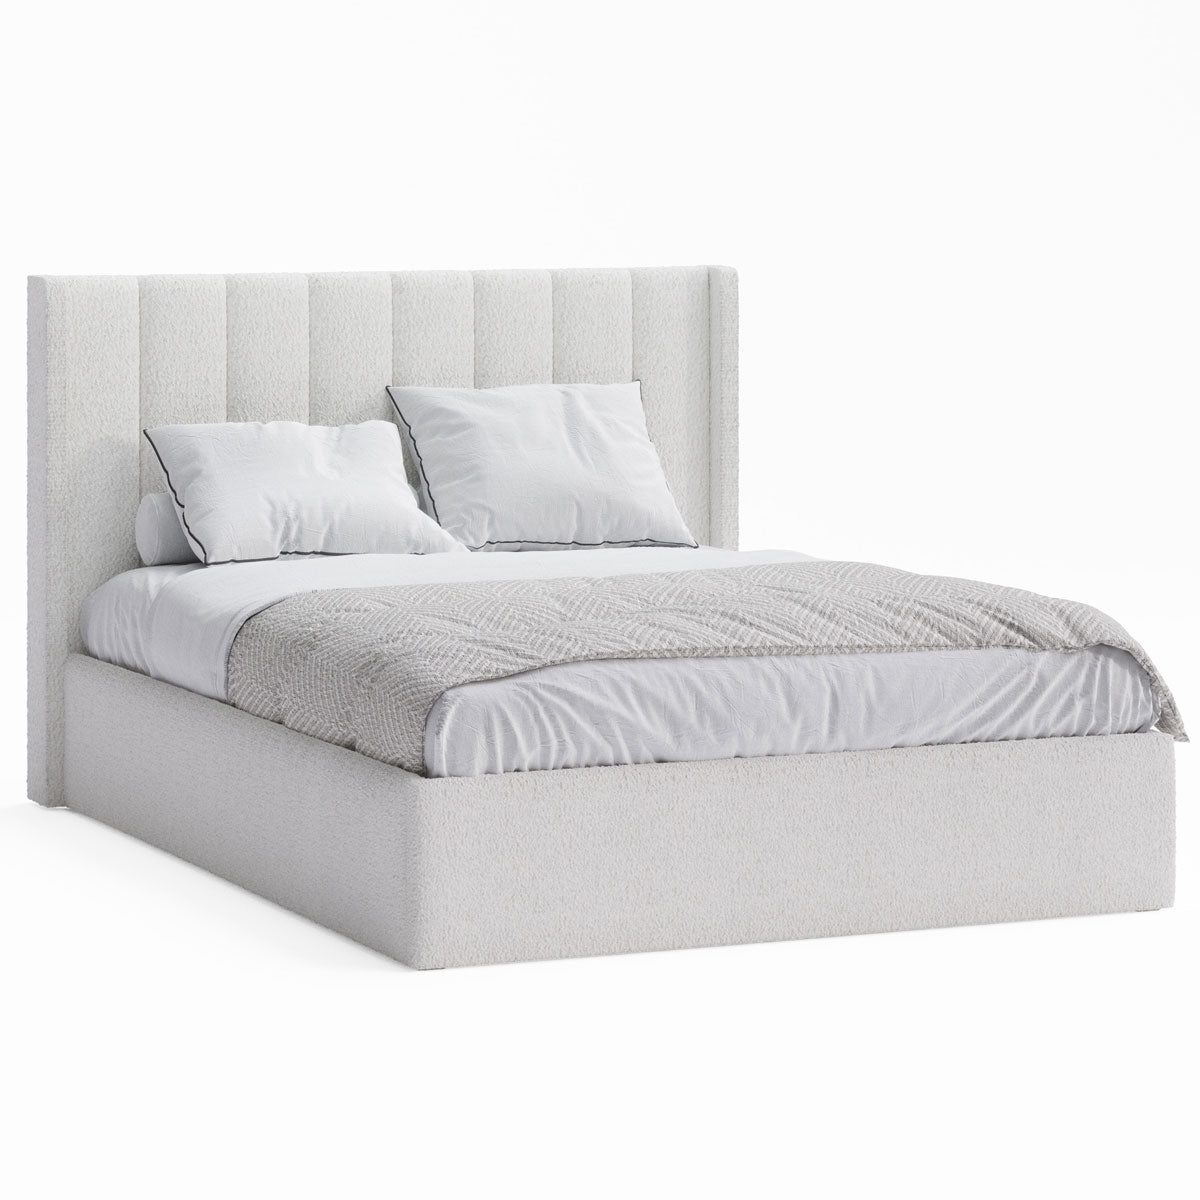 Emilie Gas Lift Storage Wing Bed Frame (Ivory White Boucle Fabric)